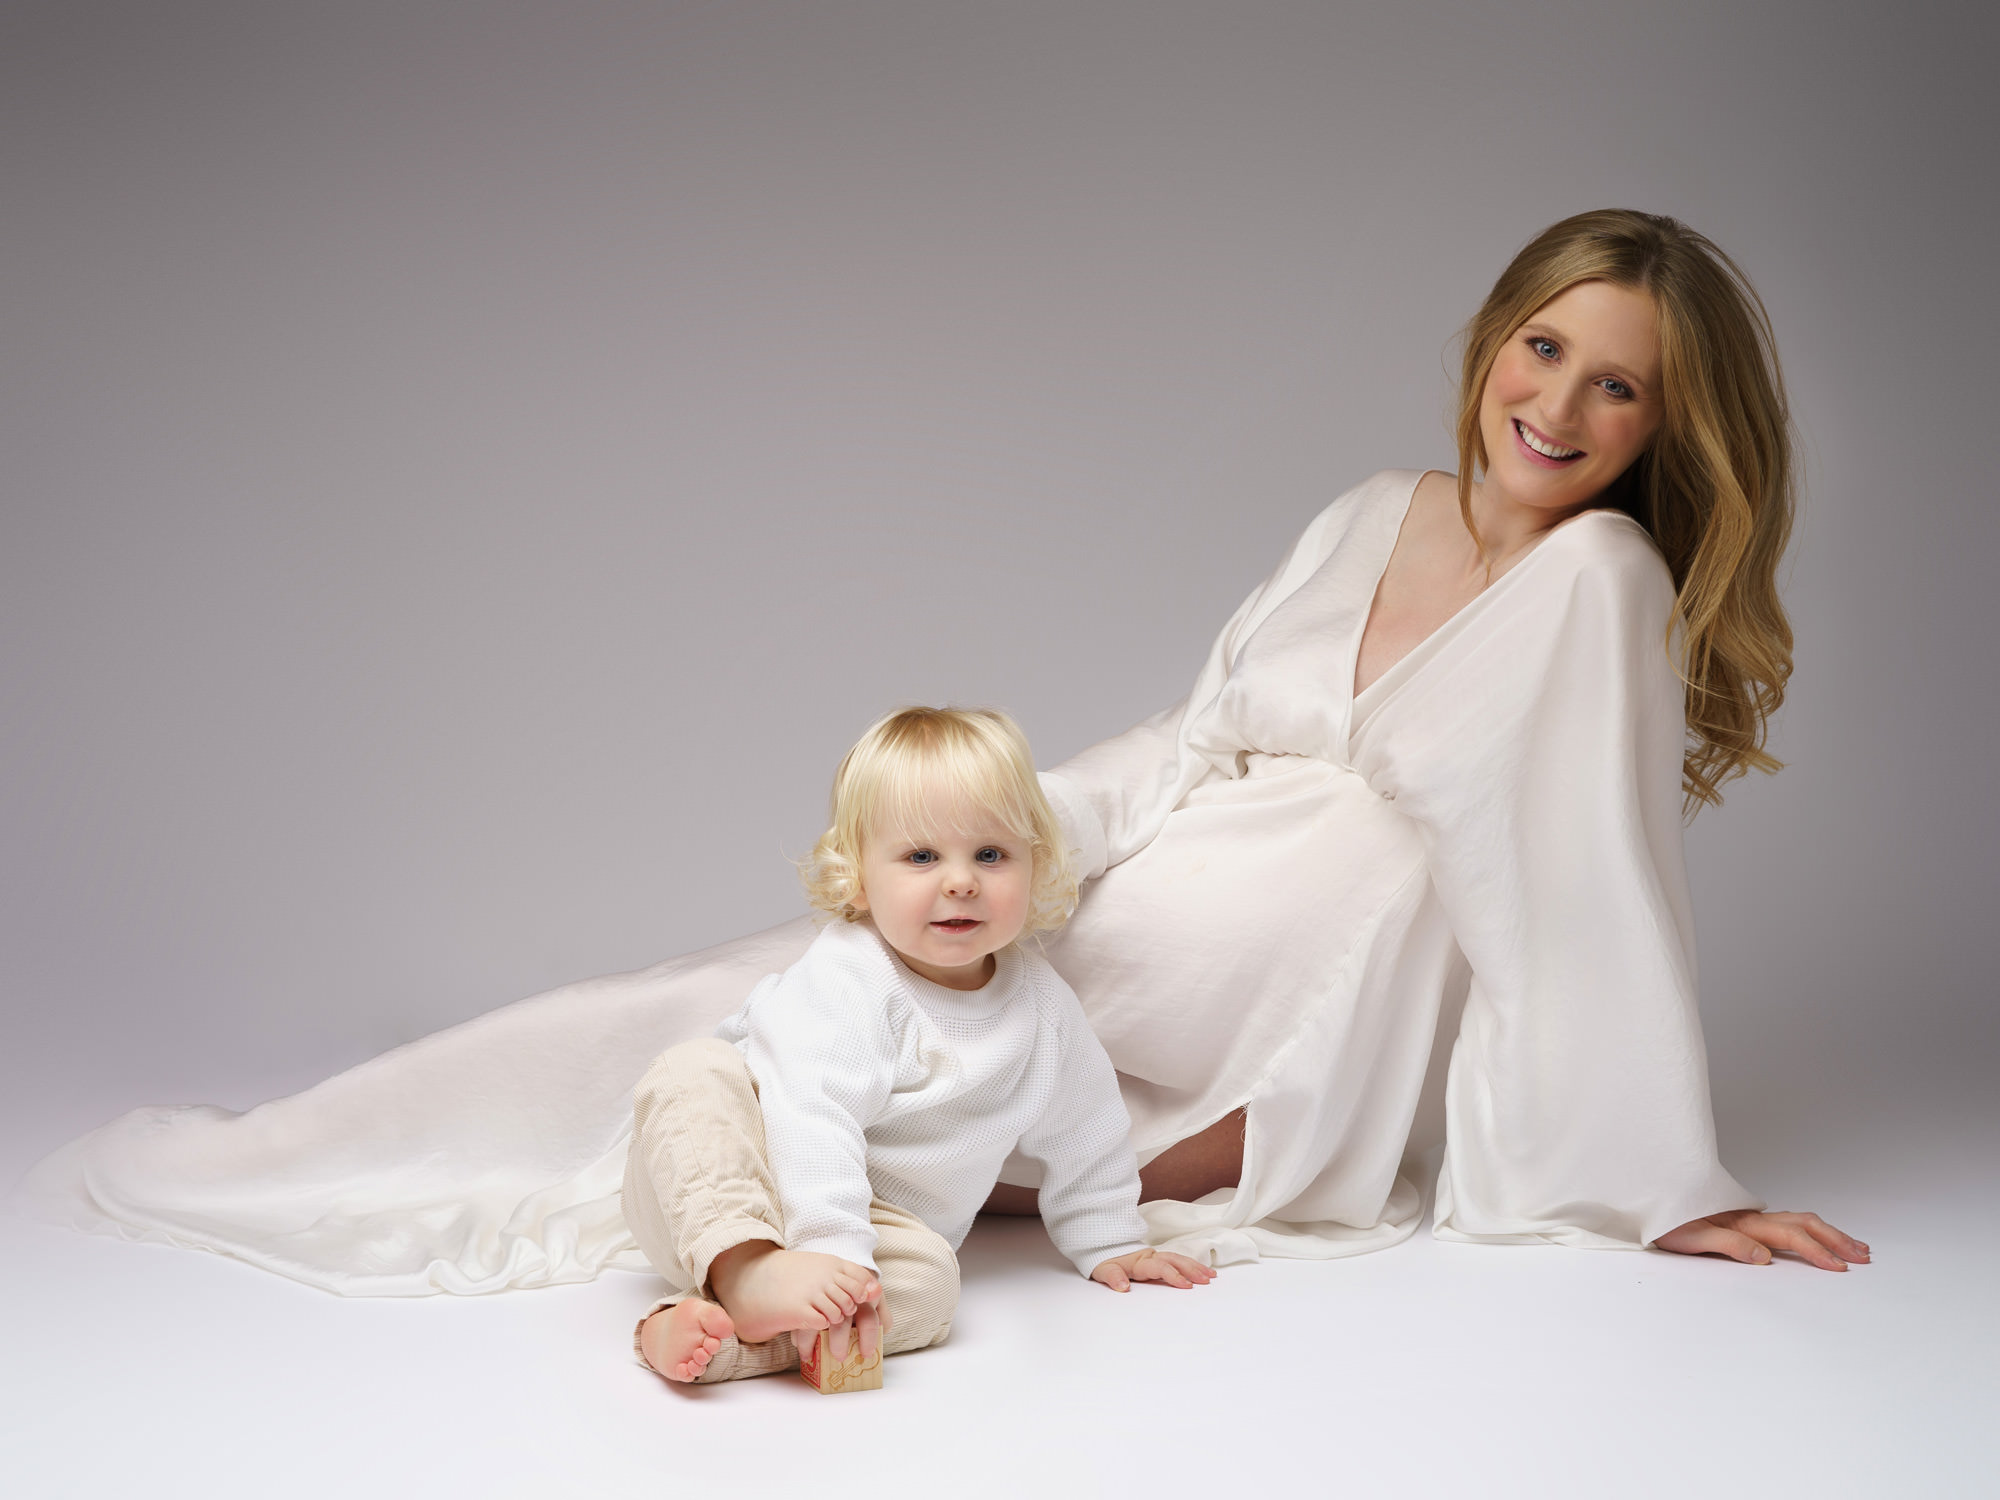 Pregnant mum wearing white dress with her toddler with blonde hair by maternity photographer in Surrey